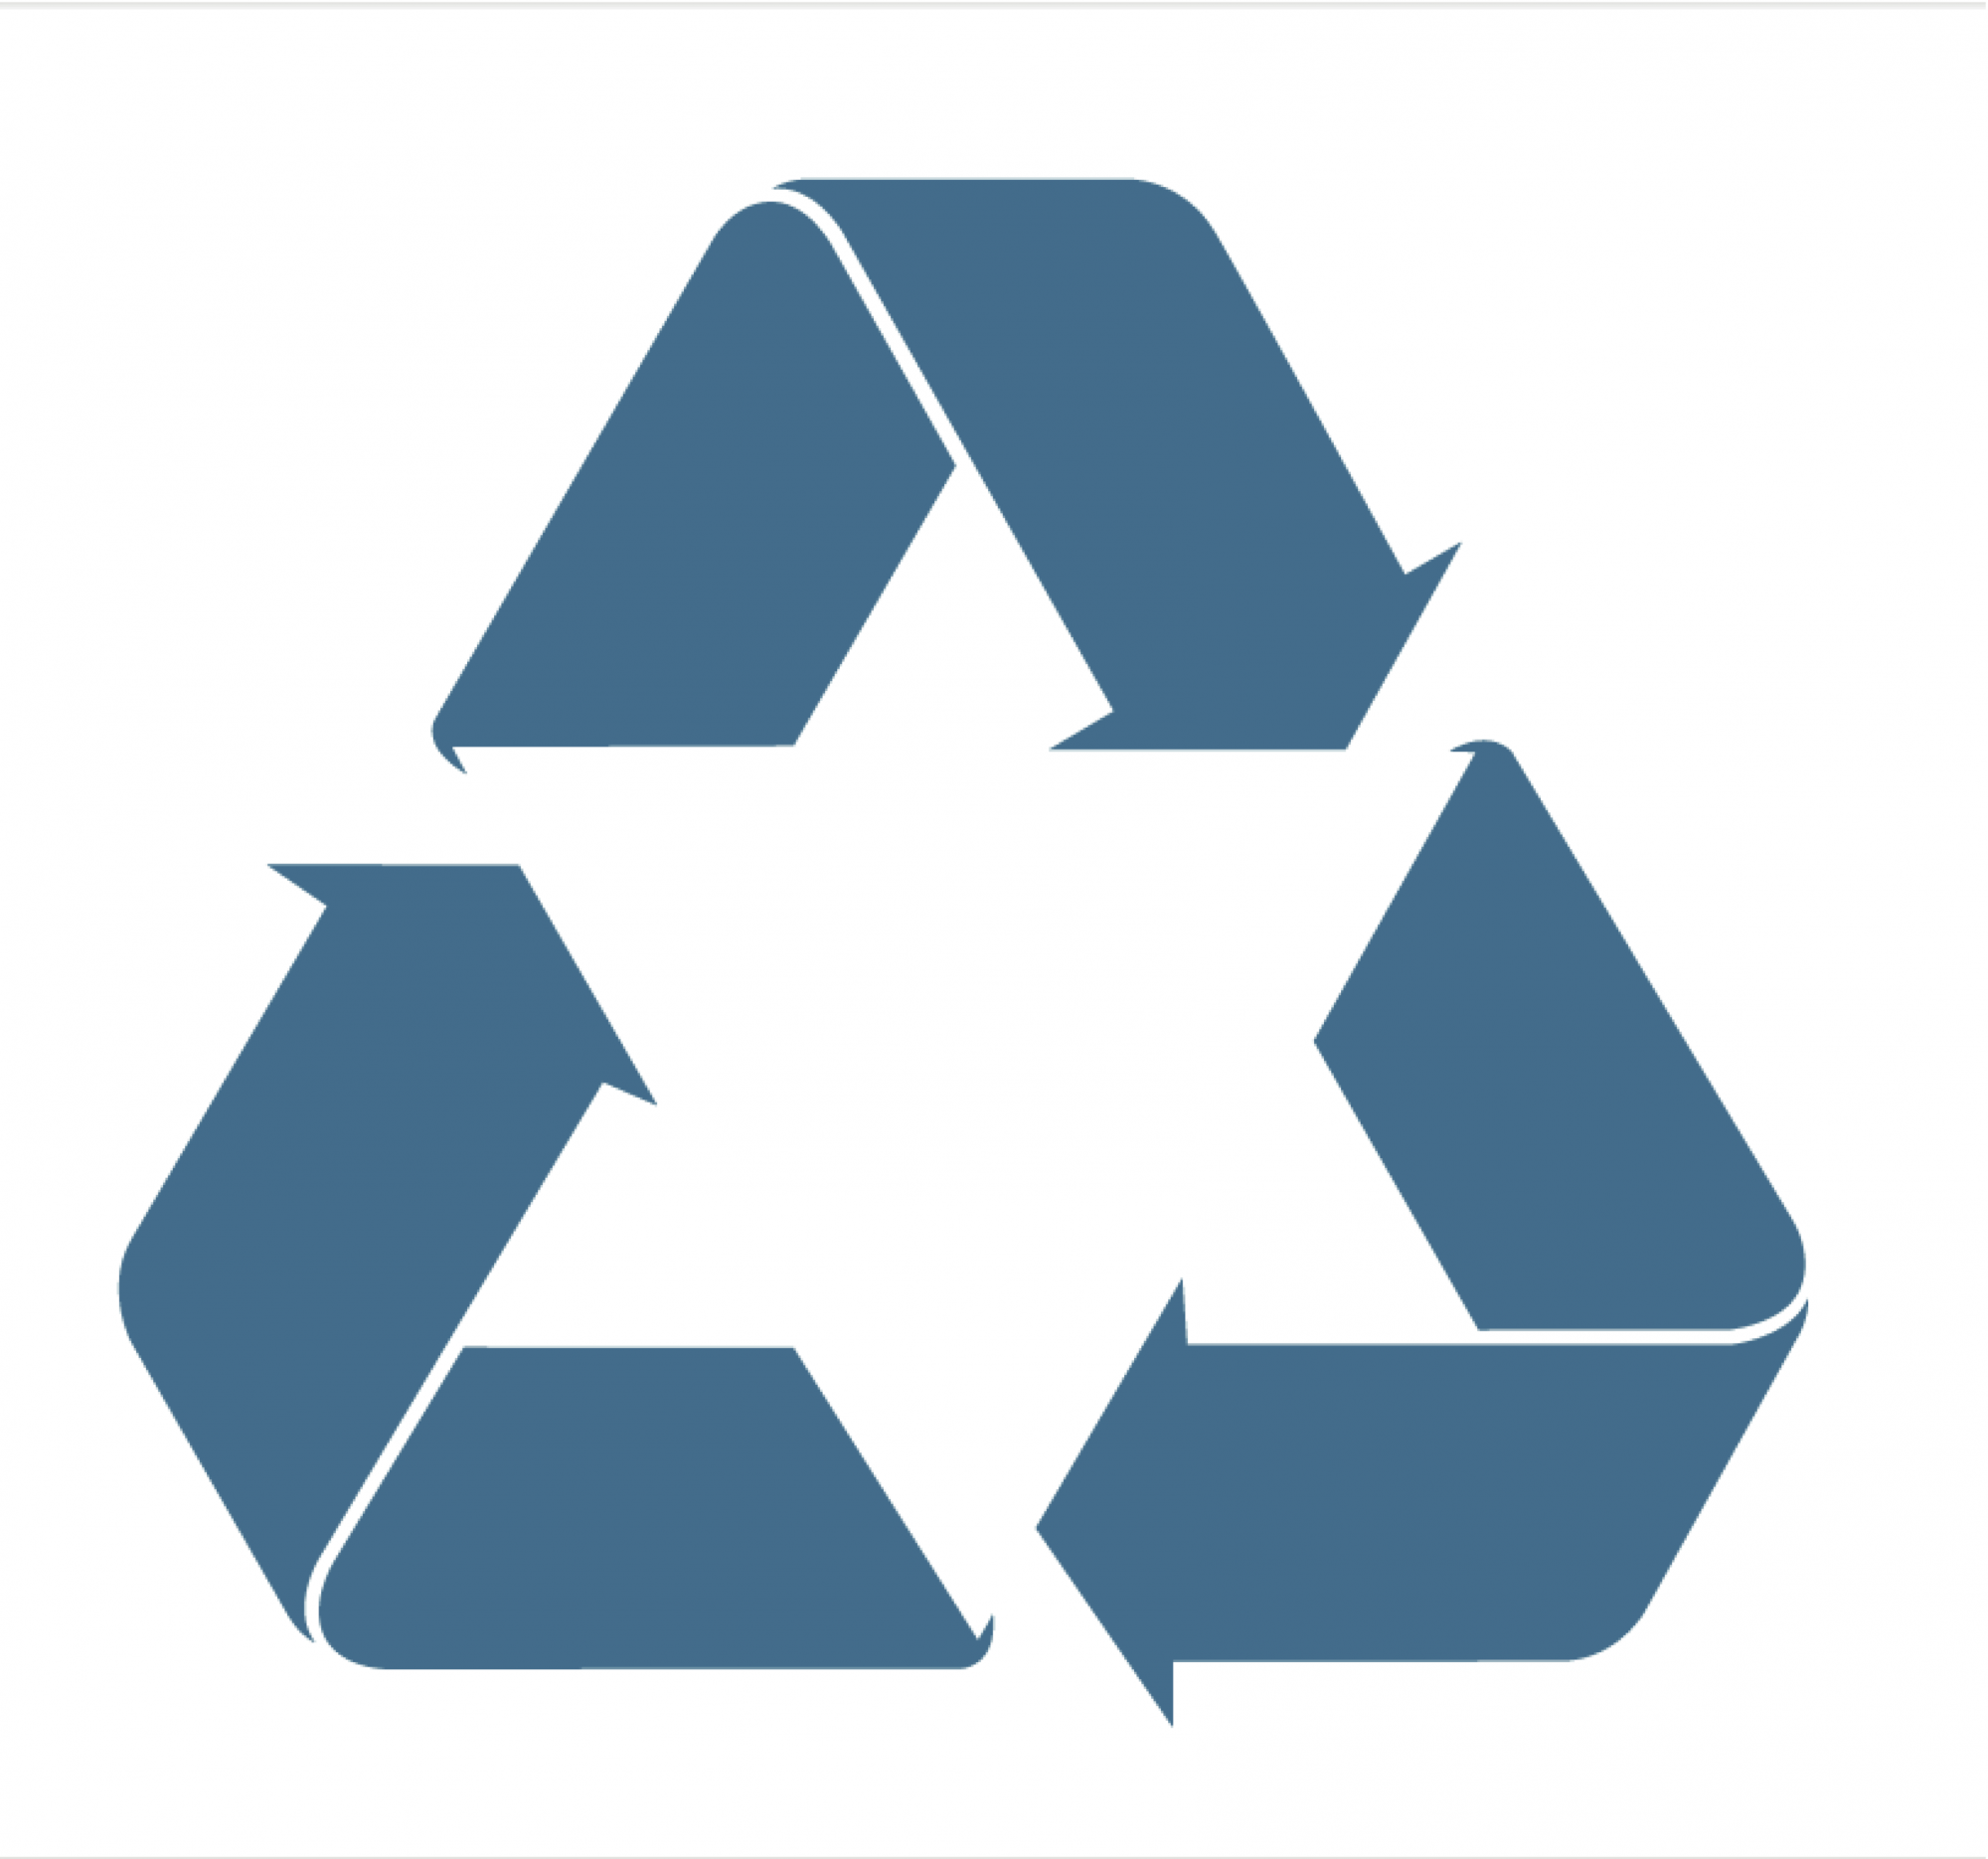 Free Recycle Logo Png, Download Free Recycle Logo Png png images, Free